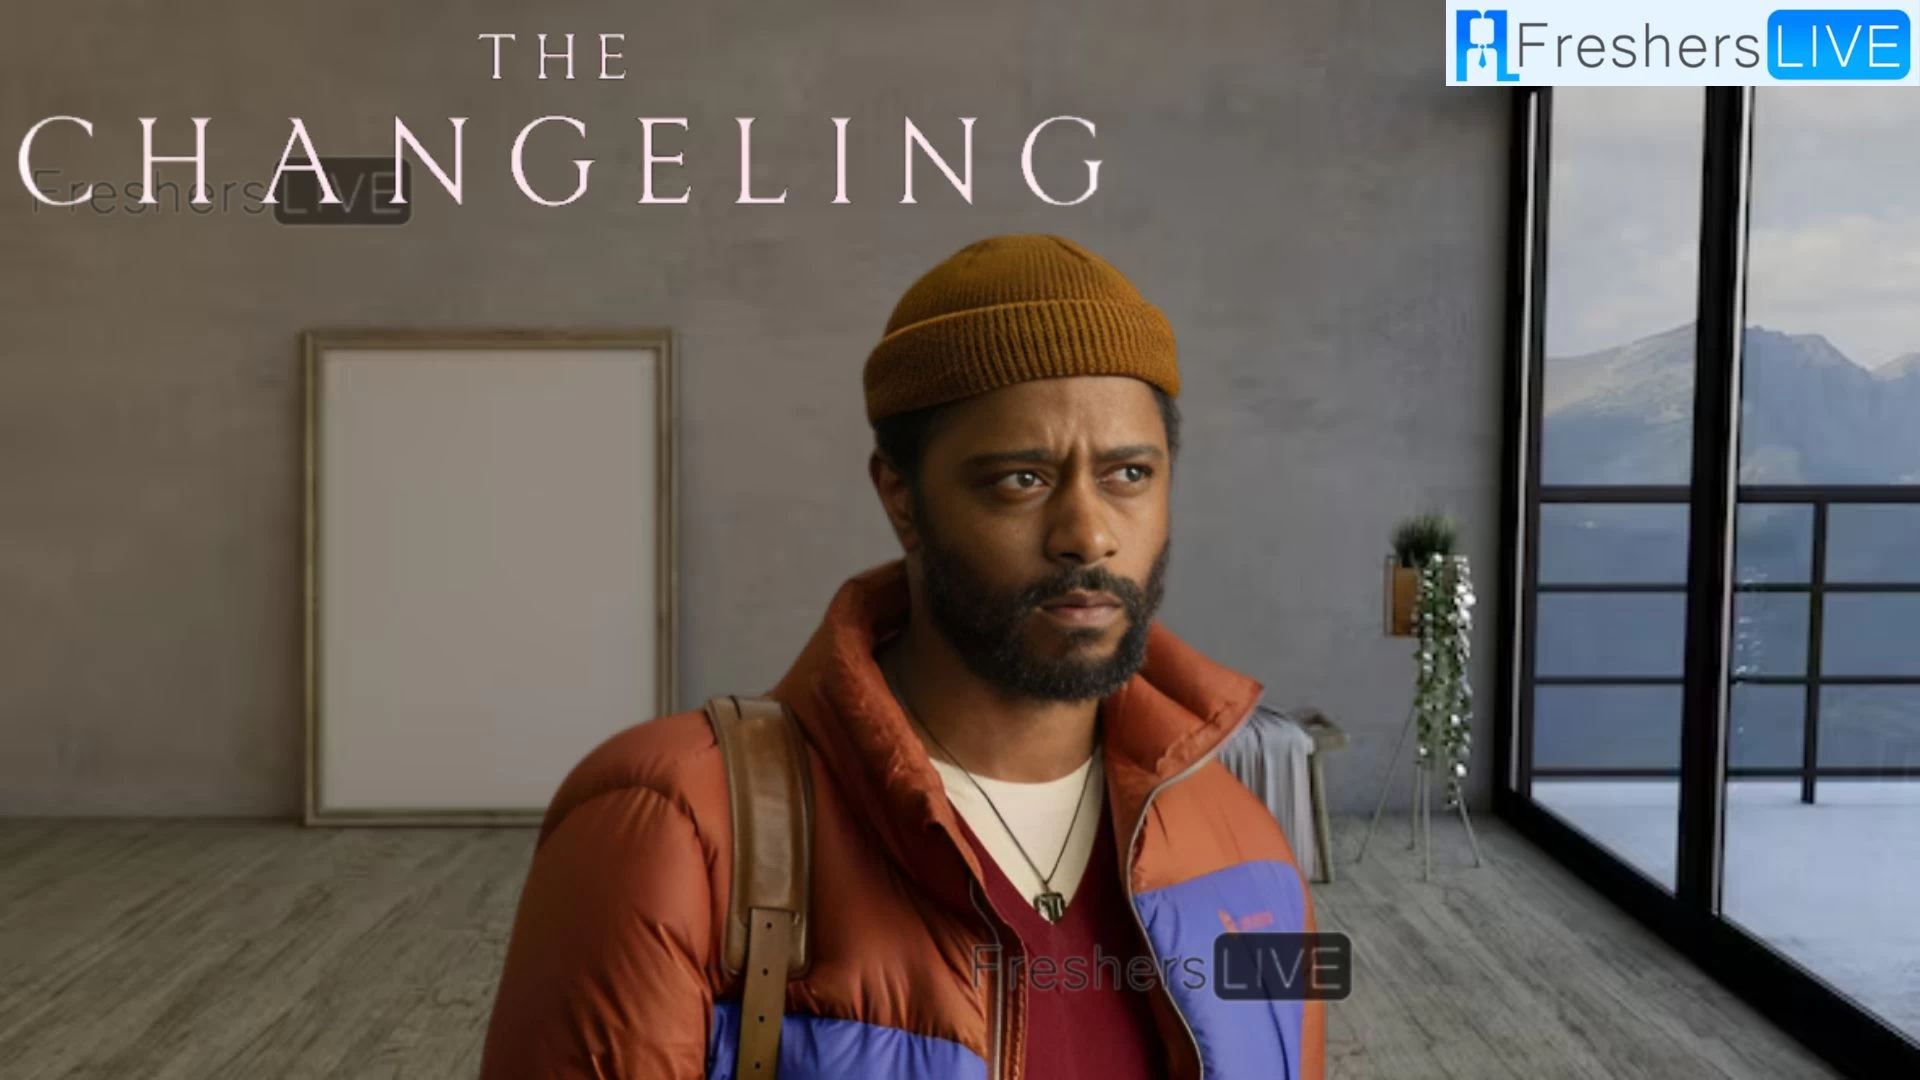 The Changeling Season 1 Episode 5 Ending Explained, Release Date, Cast, Review, Where to Watch and More